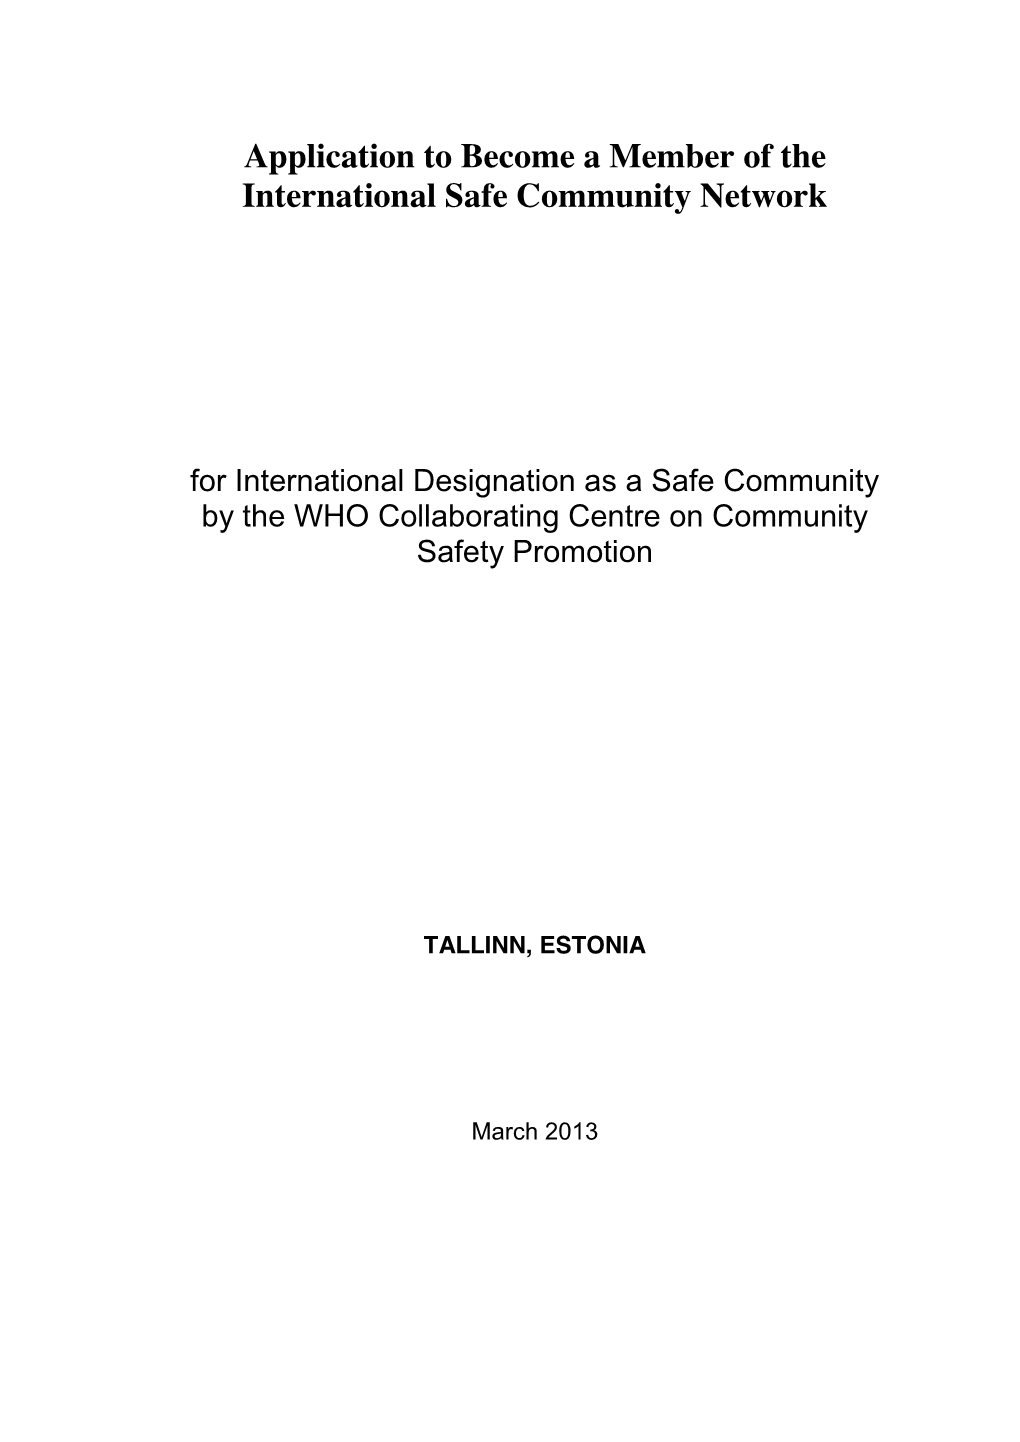 Application to Become a Member of the International Safe Community Network